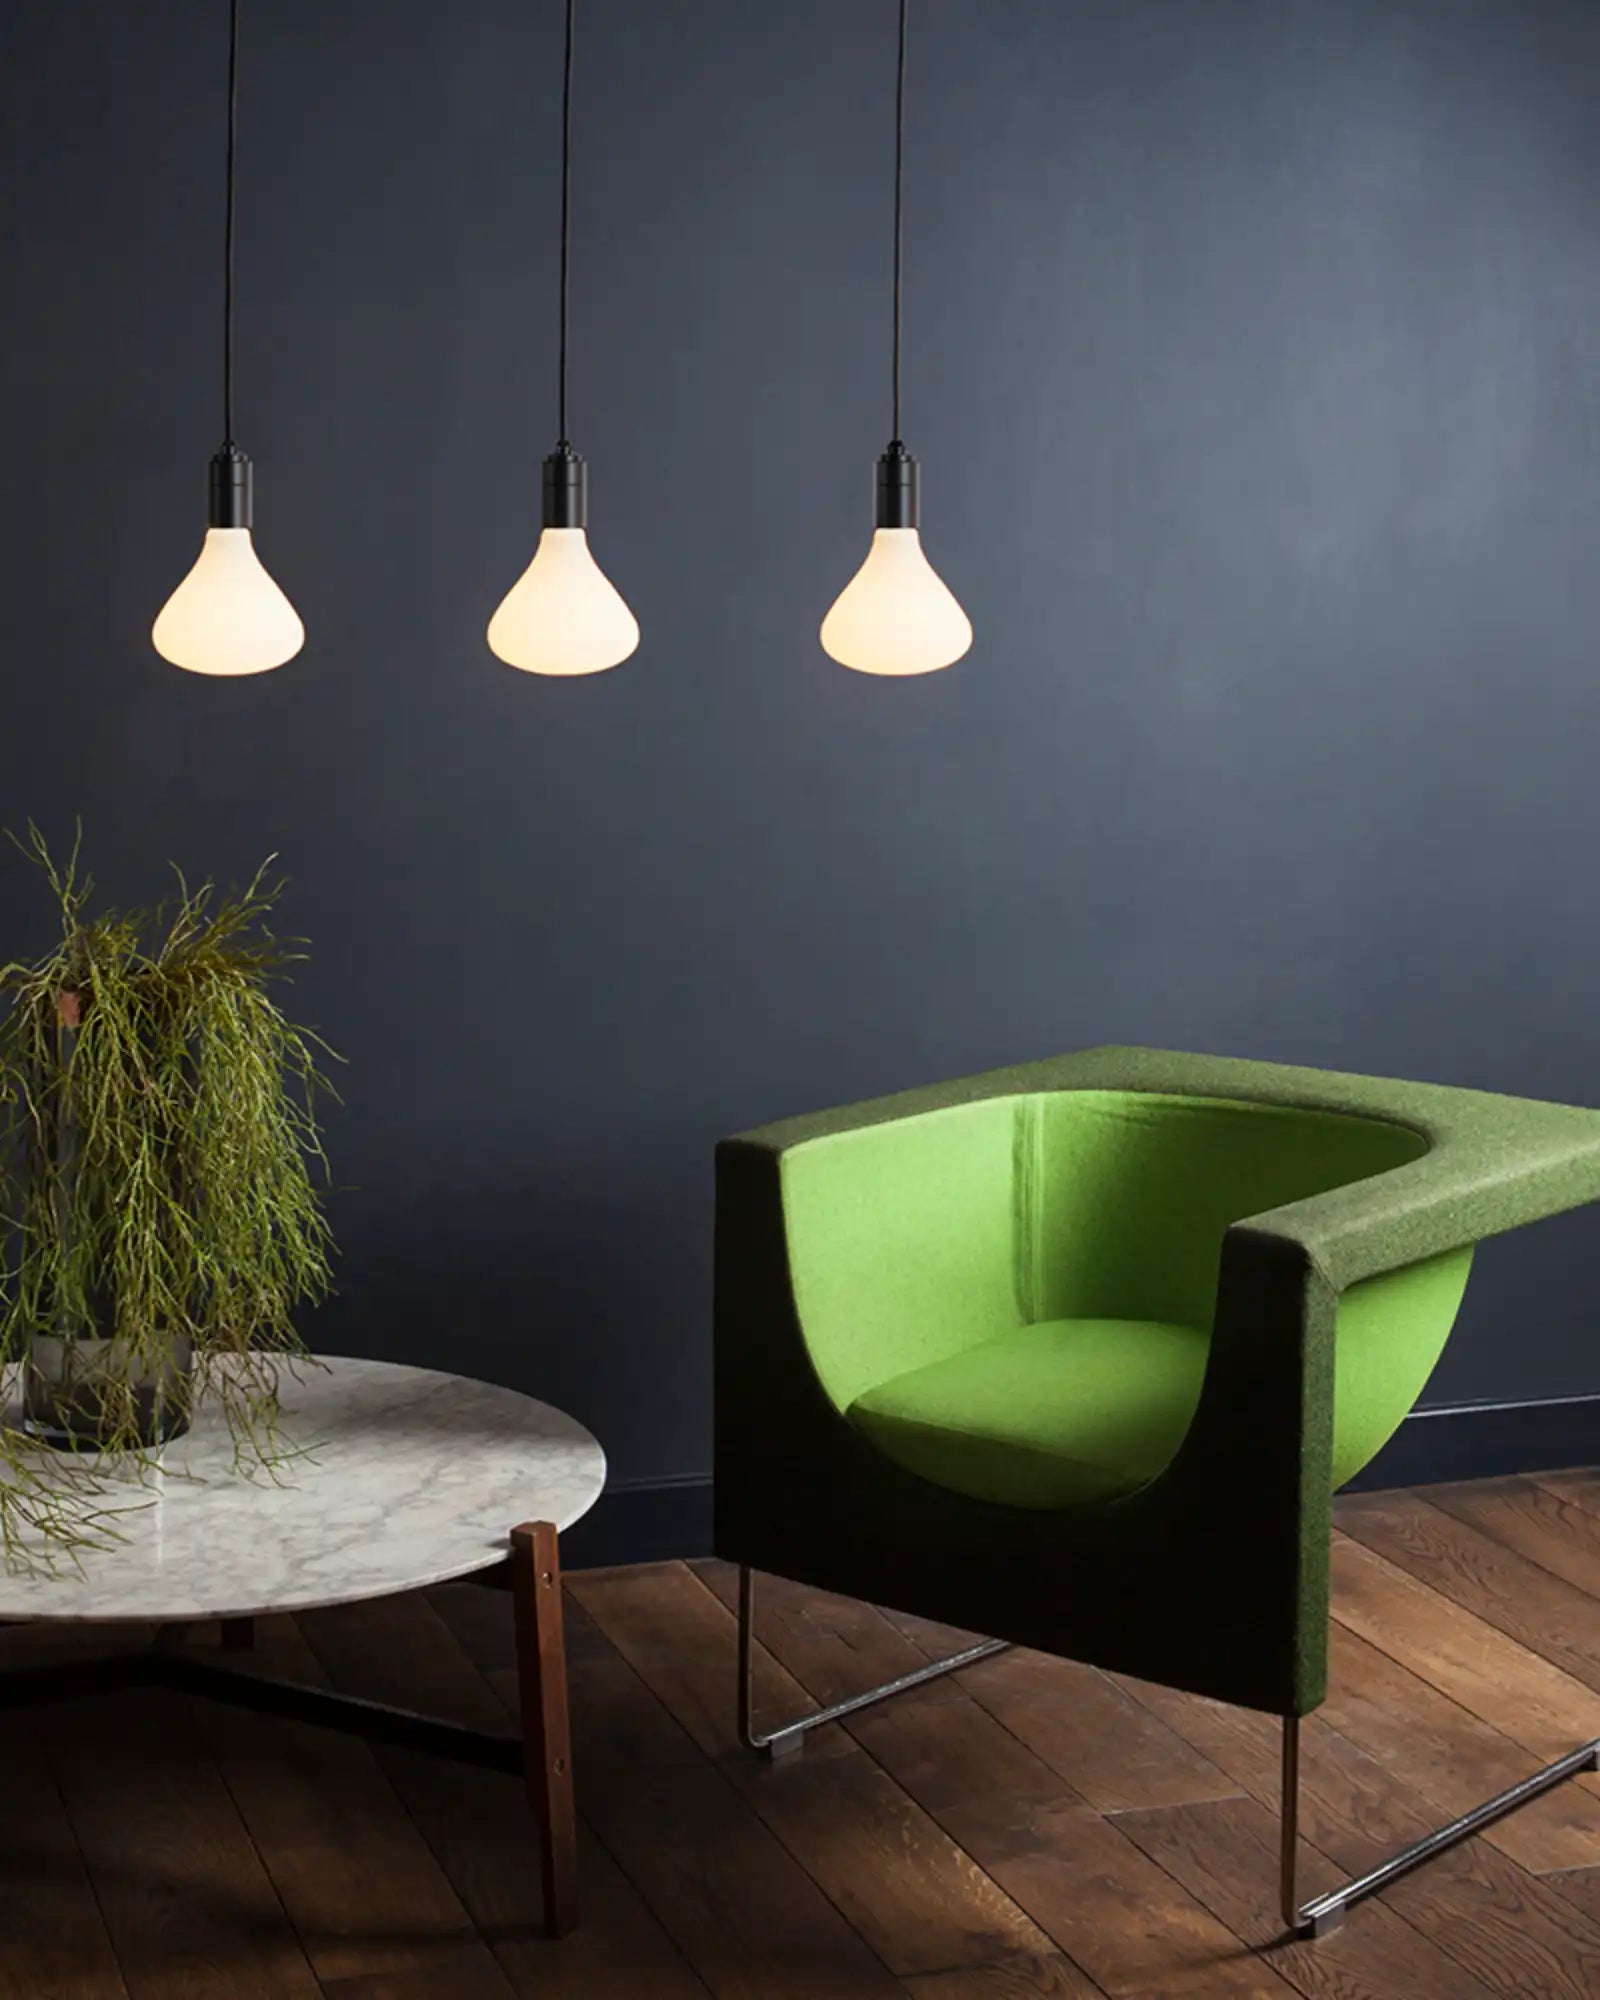 Noma Pendant Light by Tala featured within a contemporary lounge area | Nook Collections